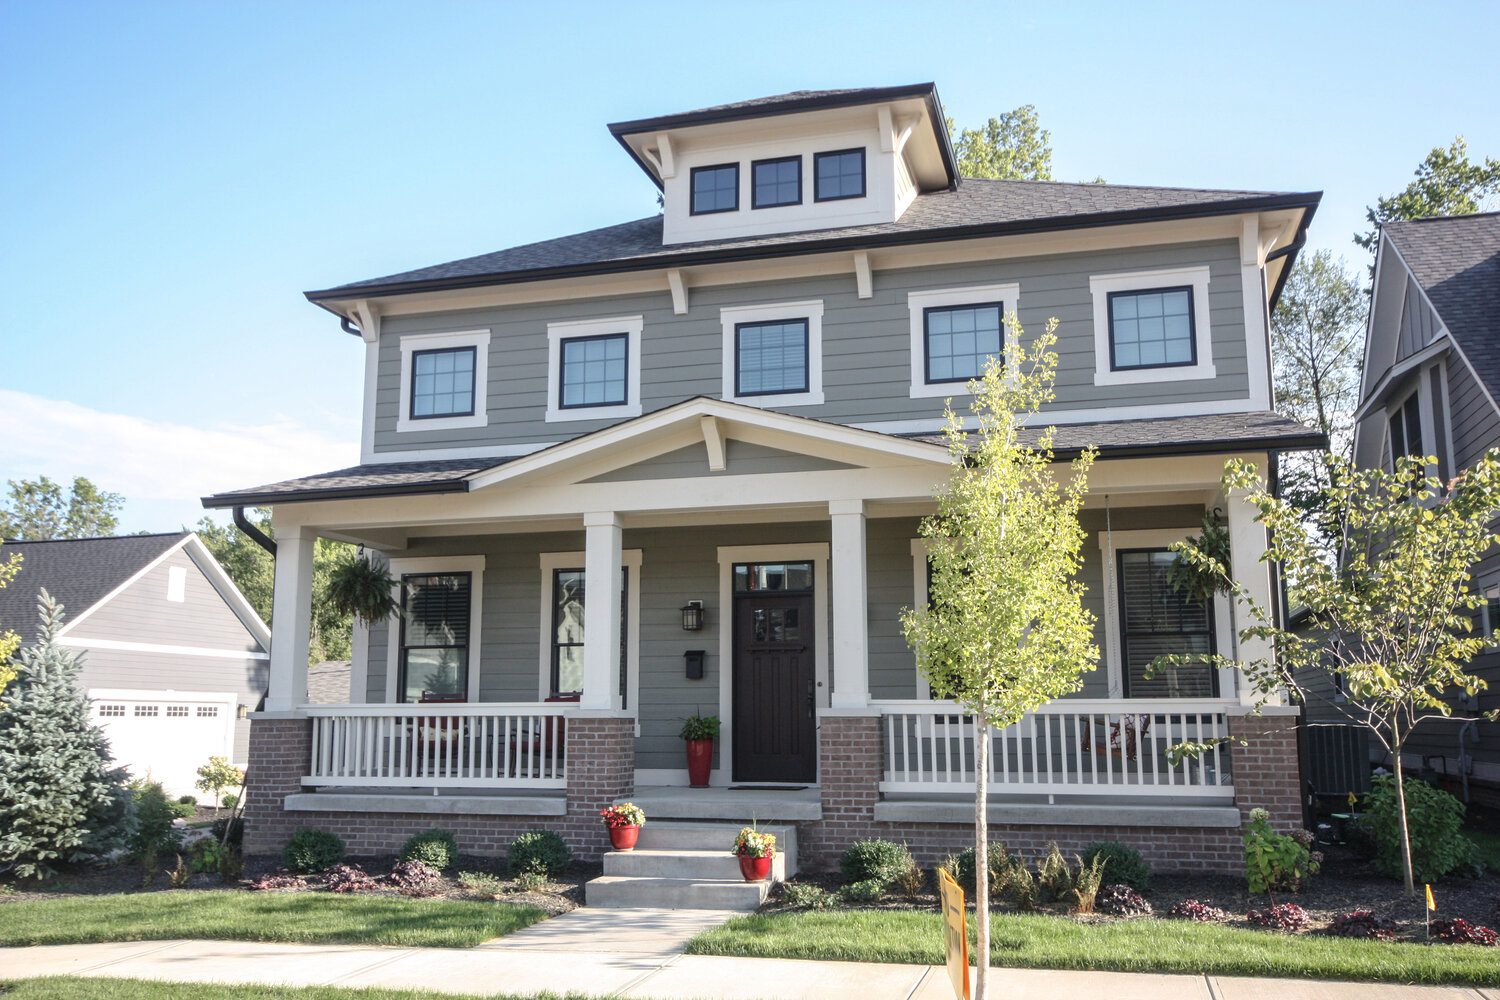 Breaking Down Popular Home Architectural Styles In Northern Indianapolis